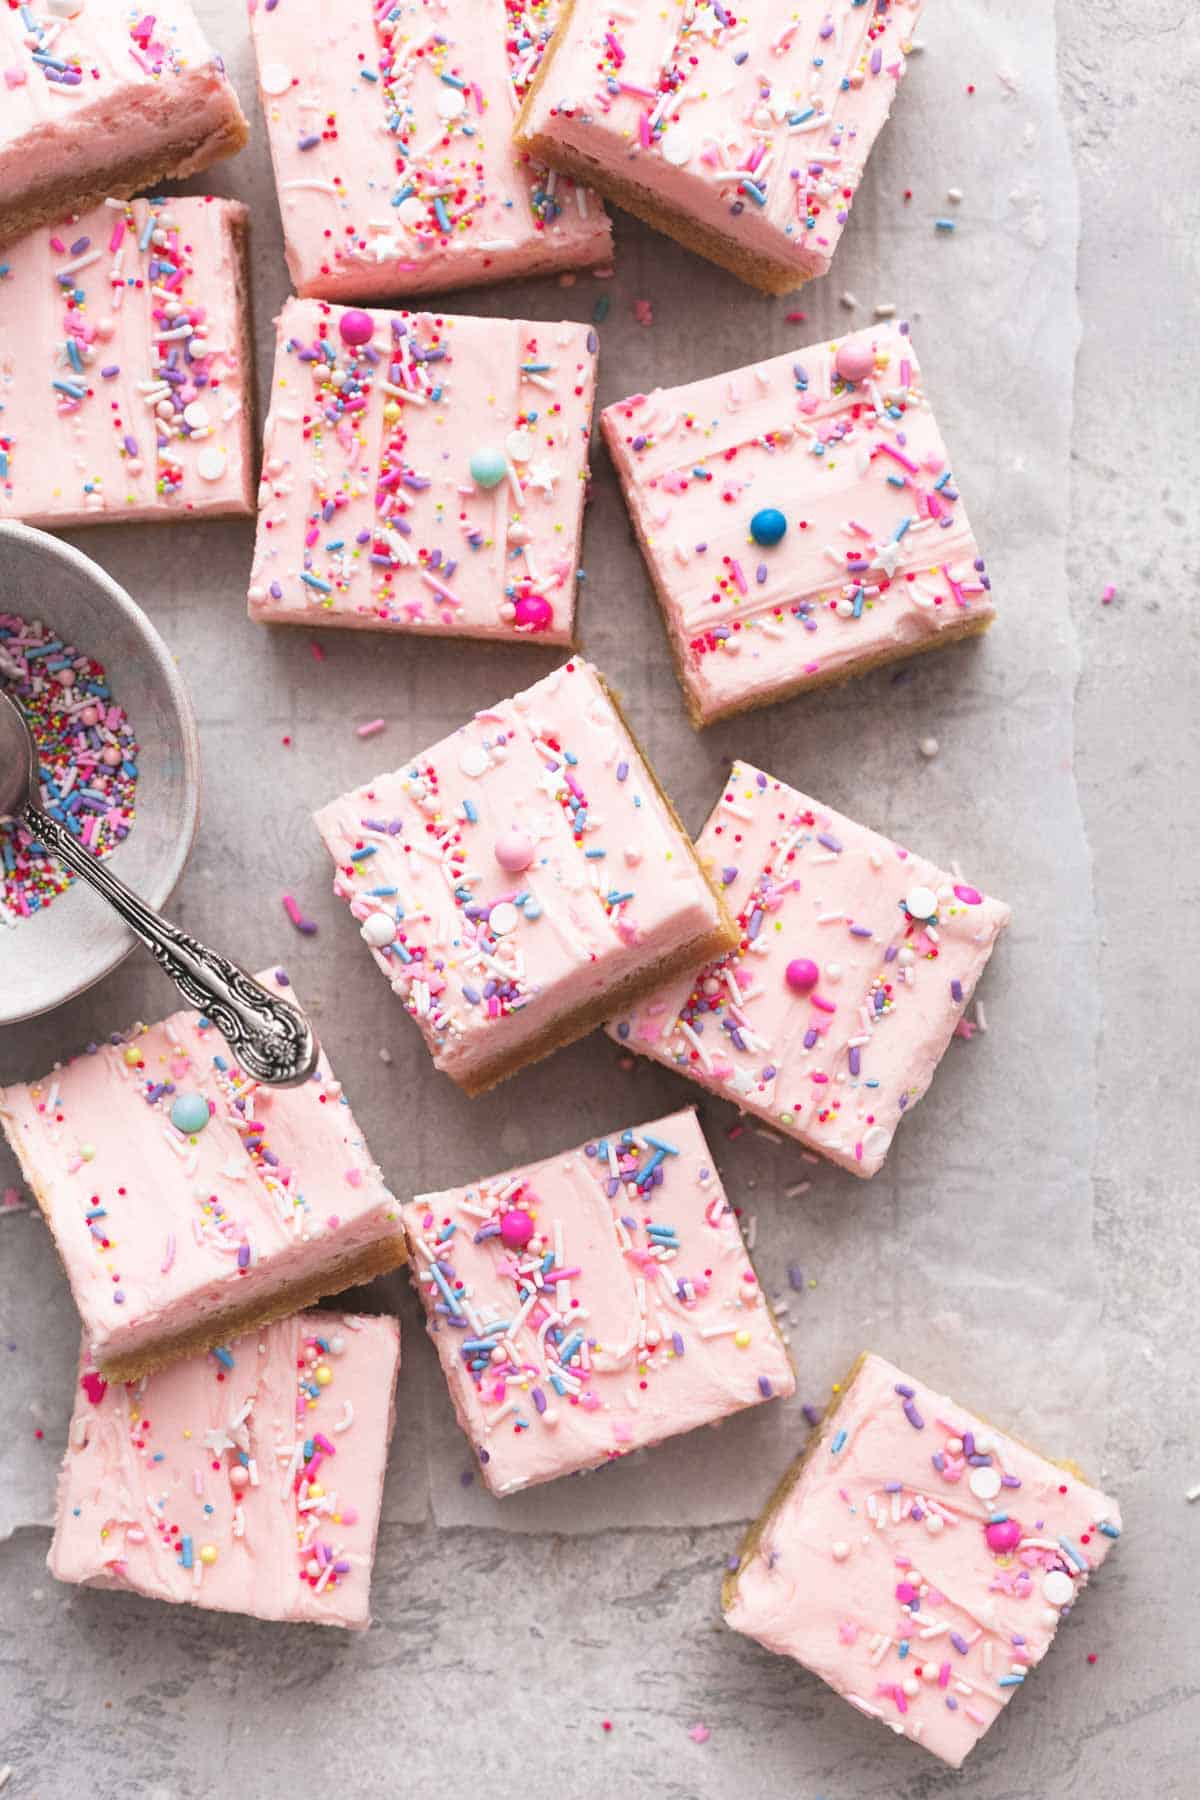 top view of sugar cookie bars with sprinkles with a bowl of sprinkles and a spoon on the side.